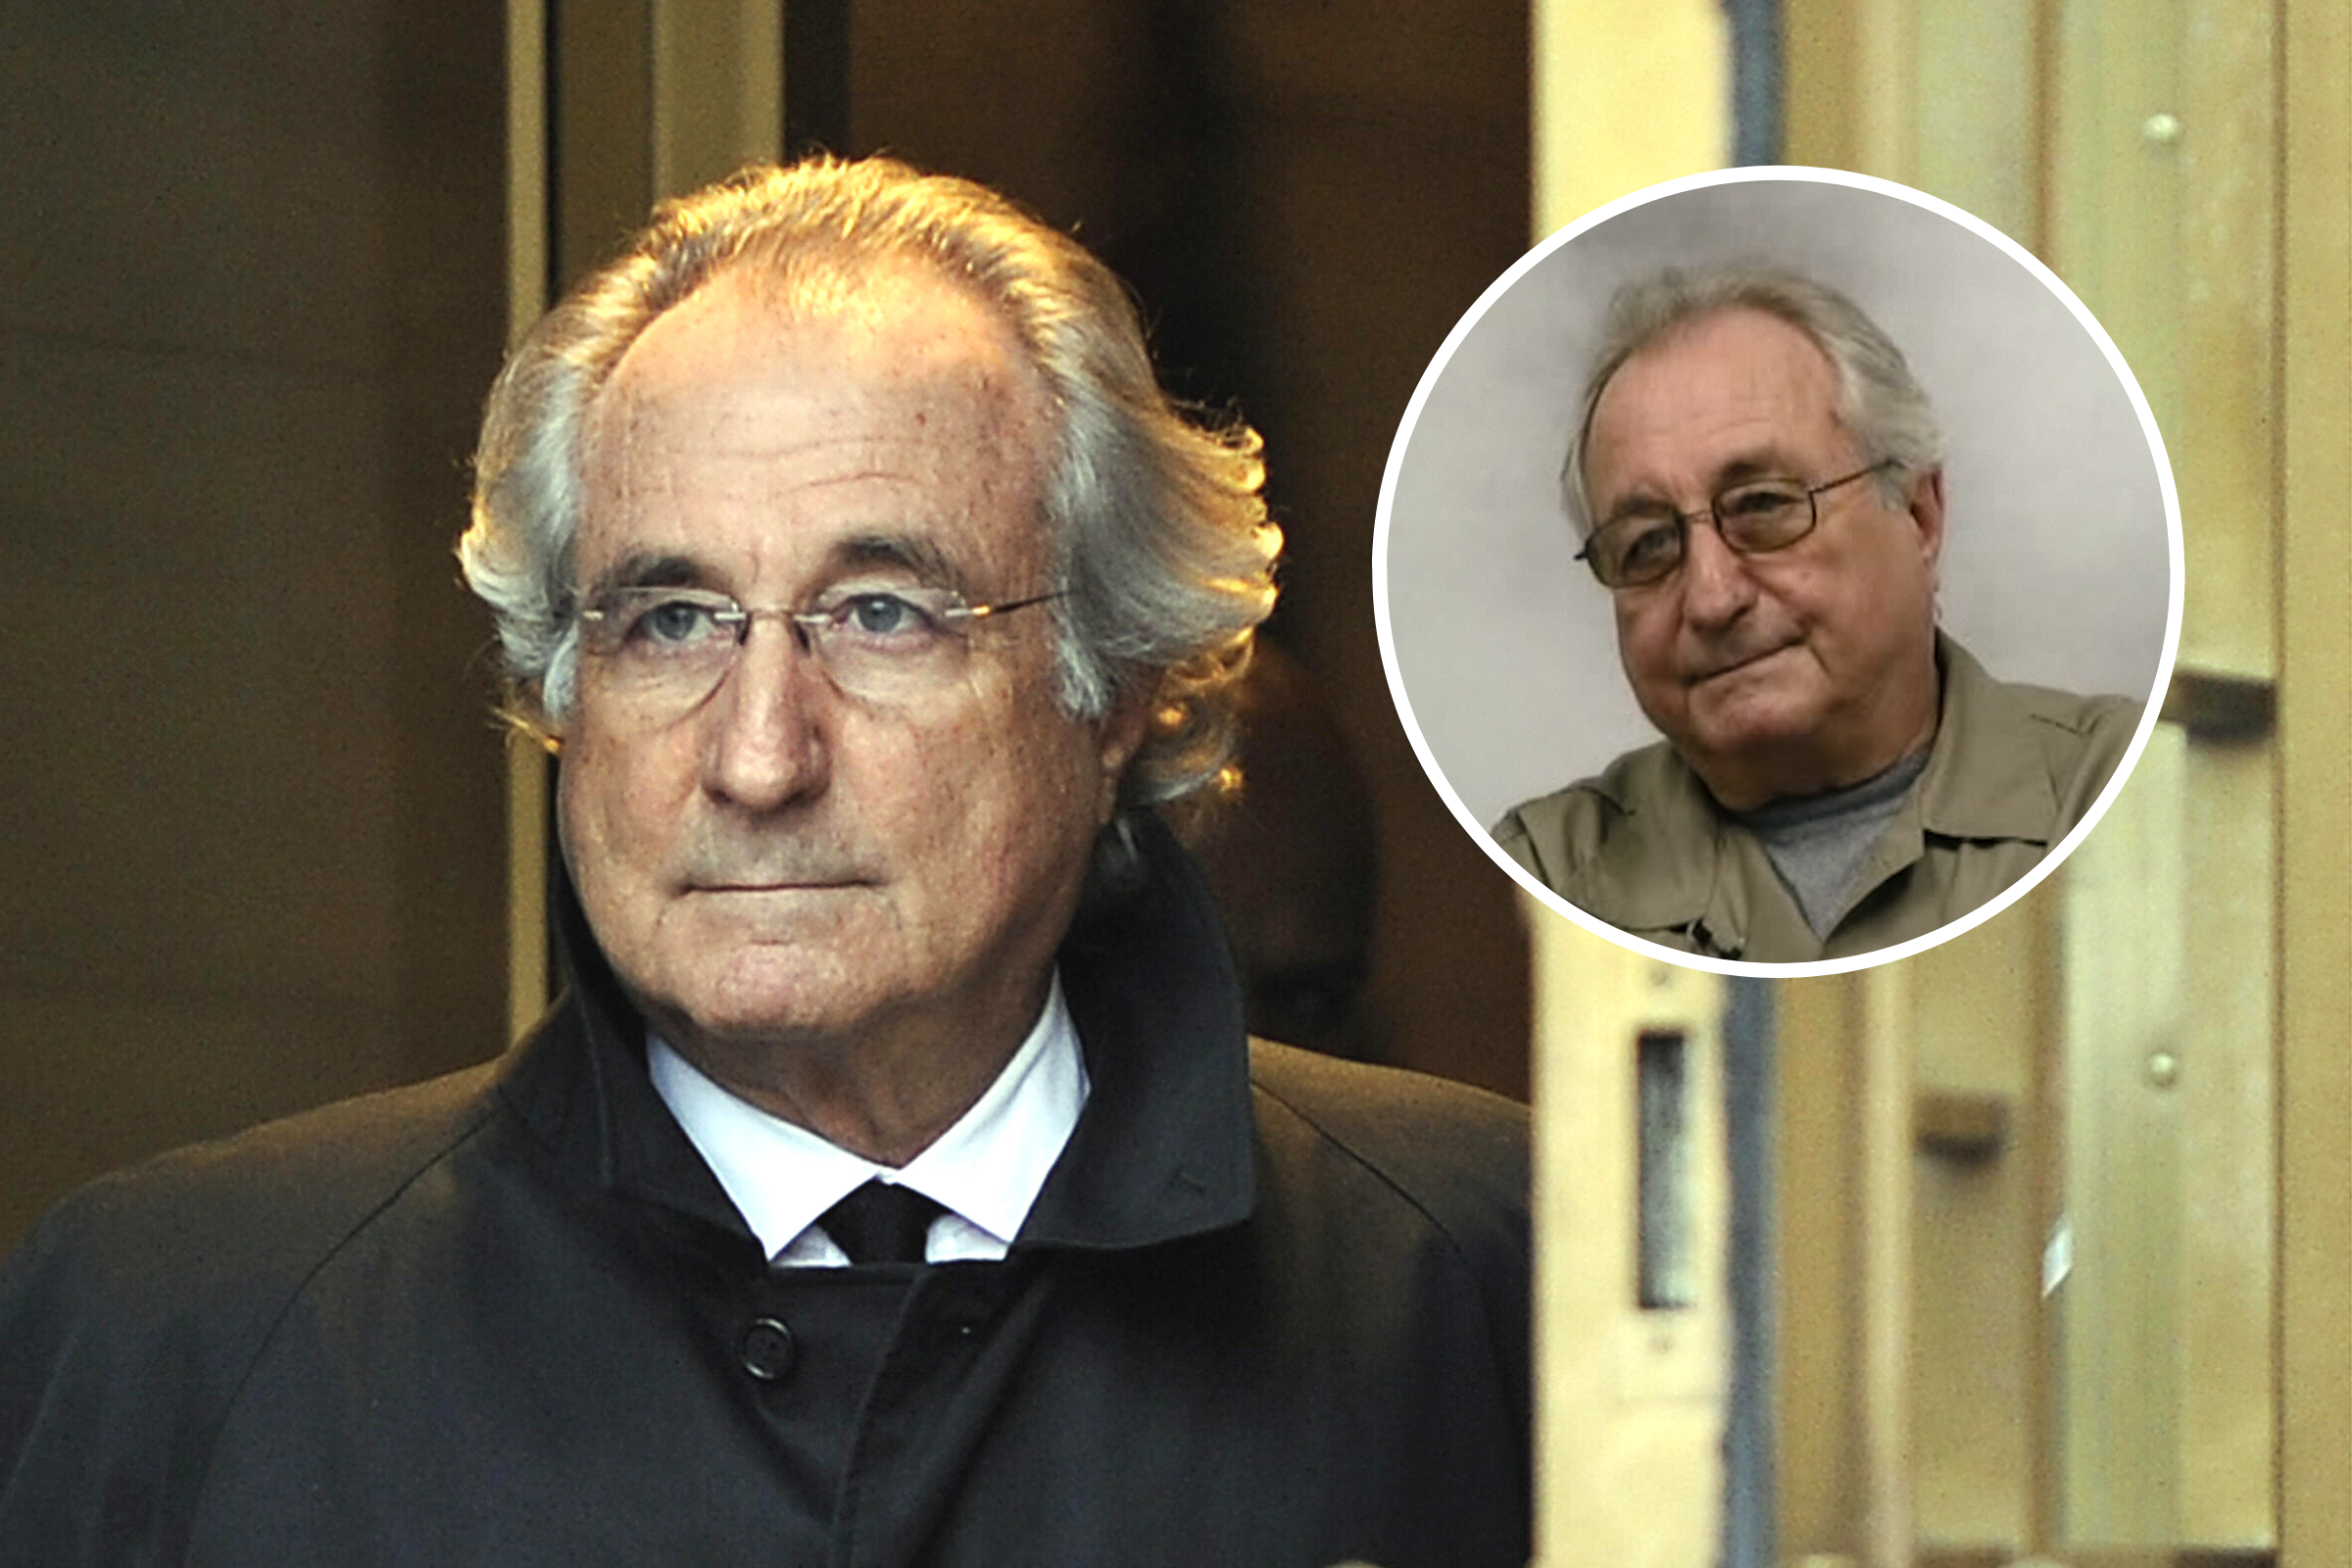 What Happened to Bernie Madoff Where Is He Now?